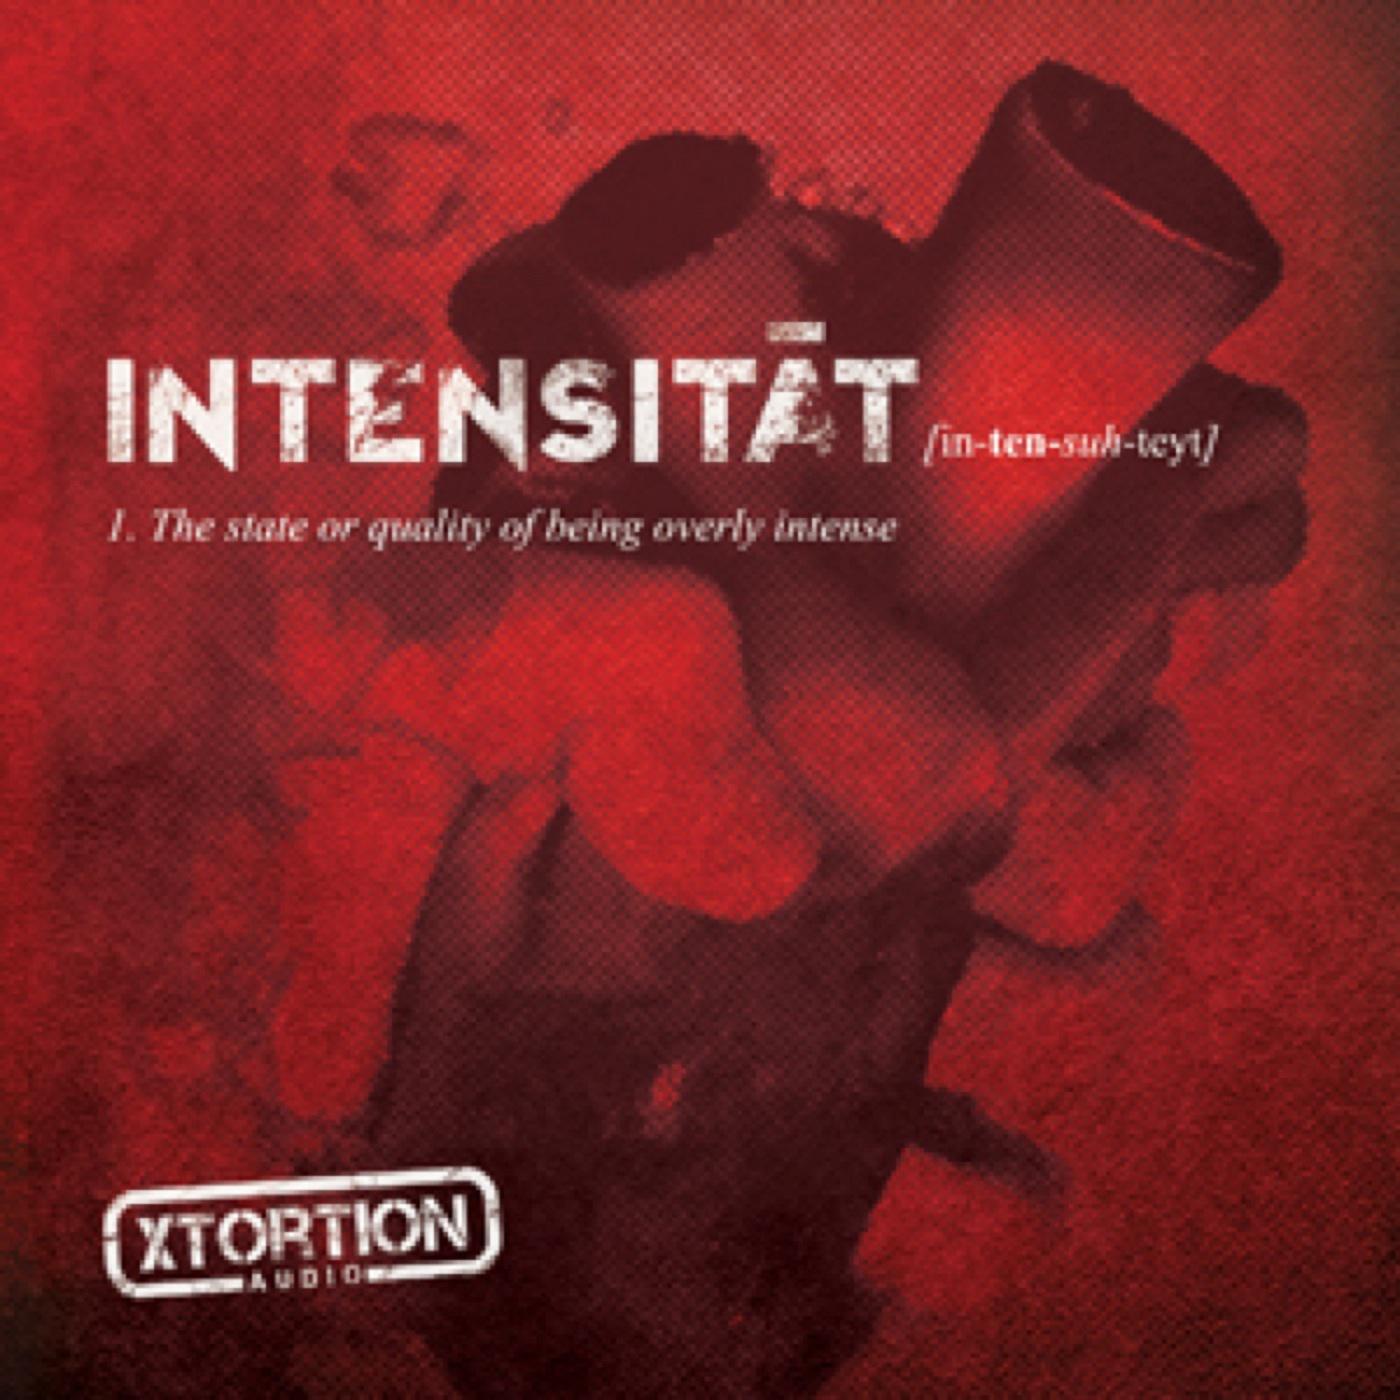 INTENSITAT - in-ten-suh-teyt (The State or Quality of Being Overly Intense)专辑